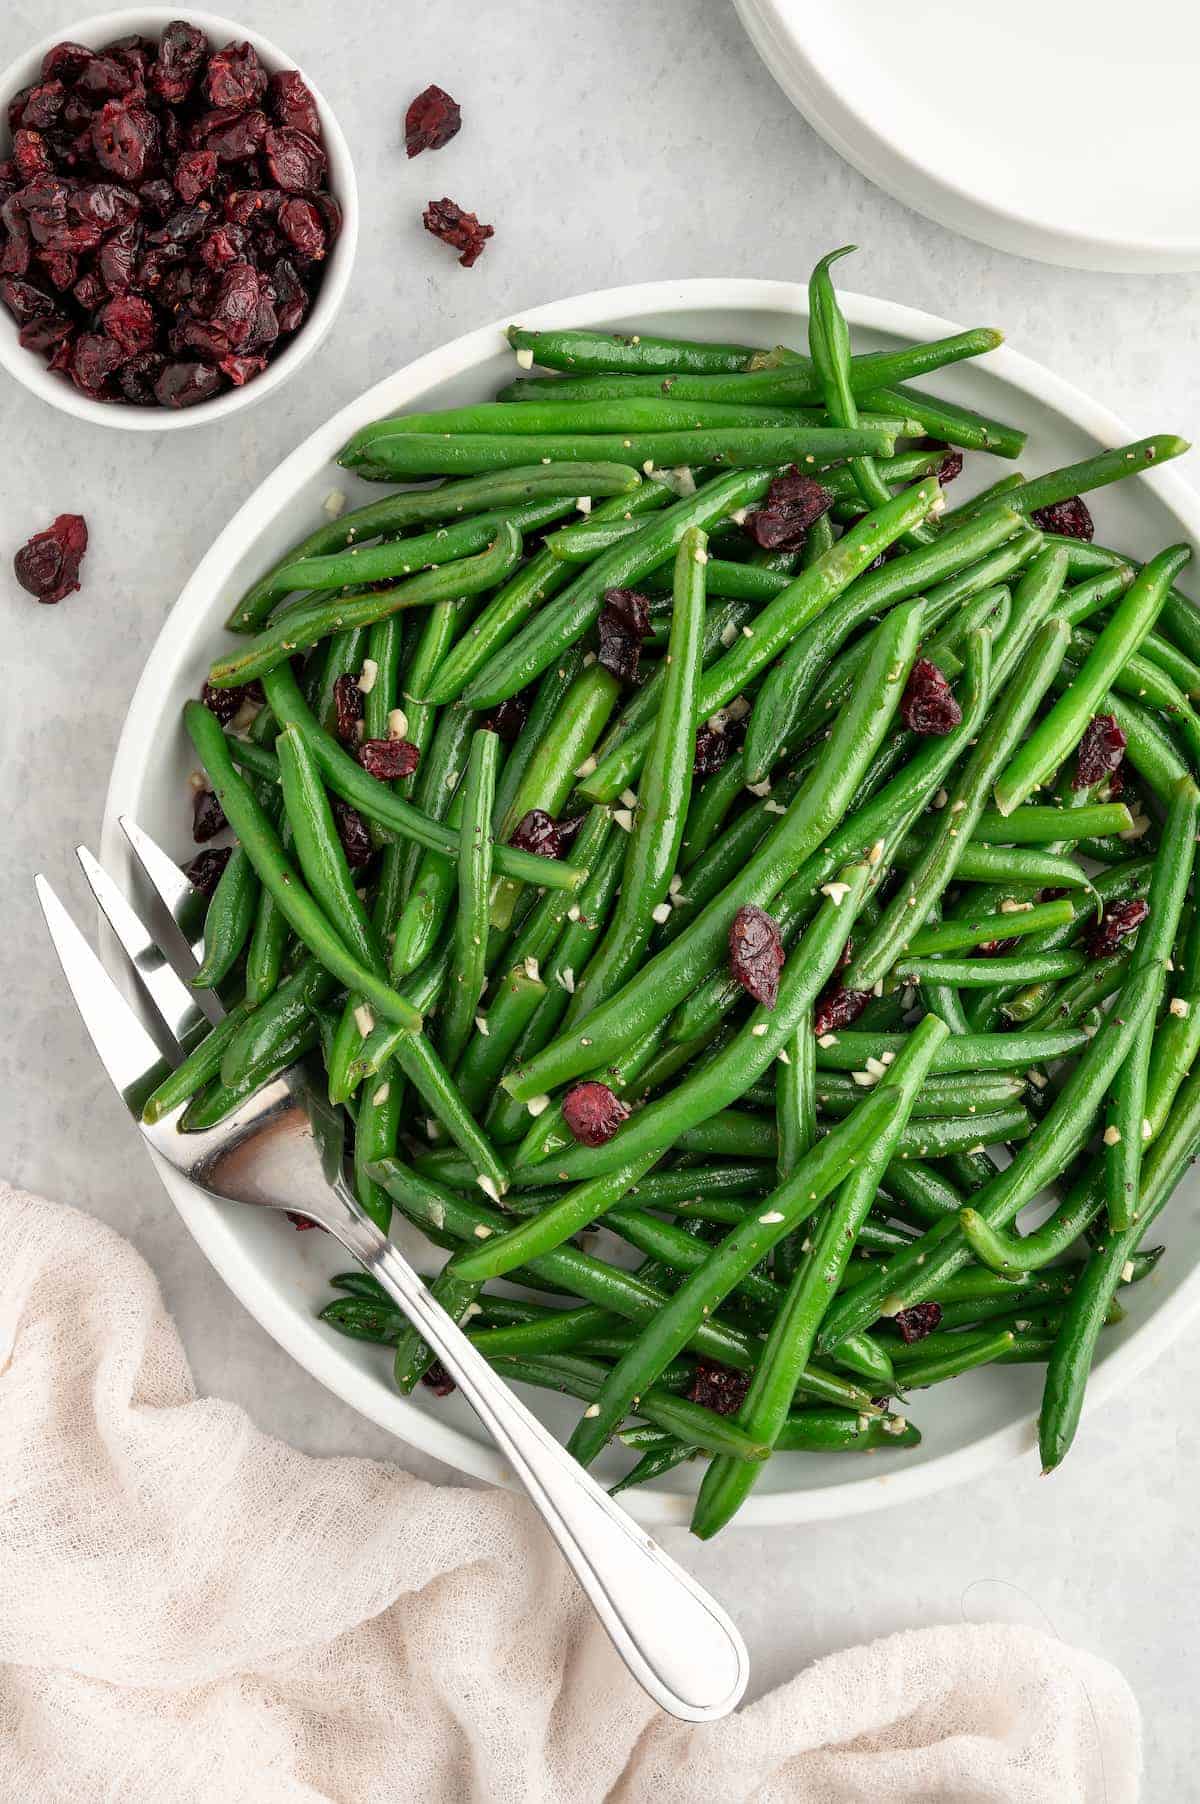 Garlic green beans with cranberries on a white plate, with a small bowl of dried cranberries to the side.